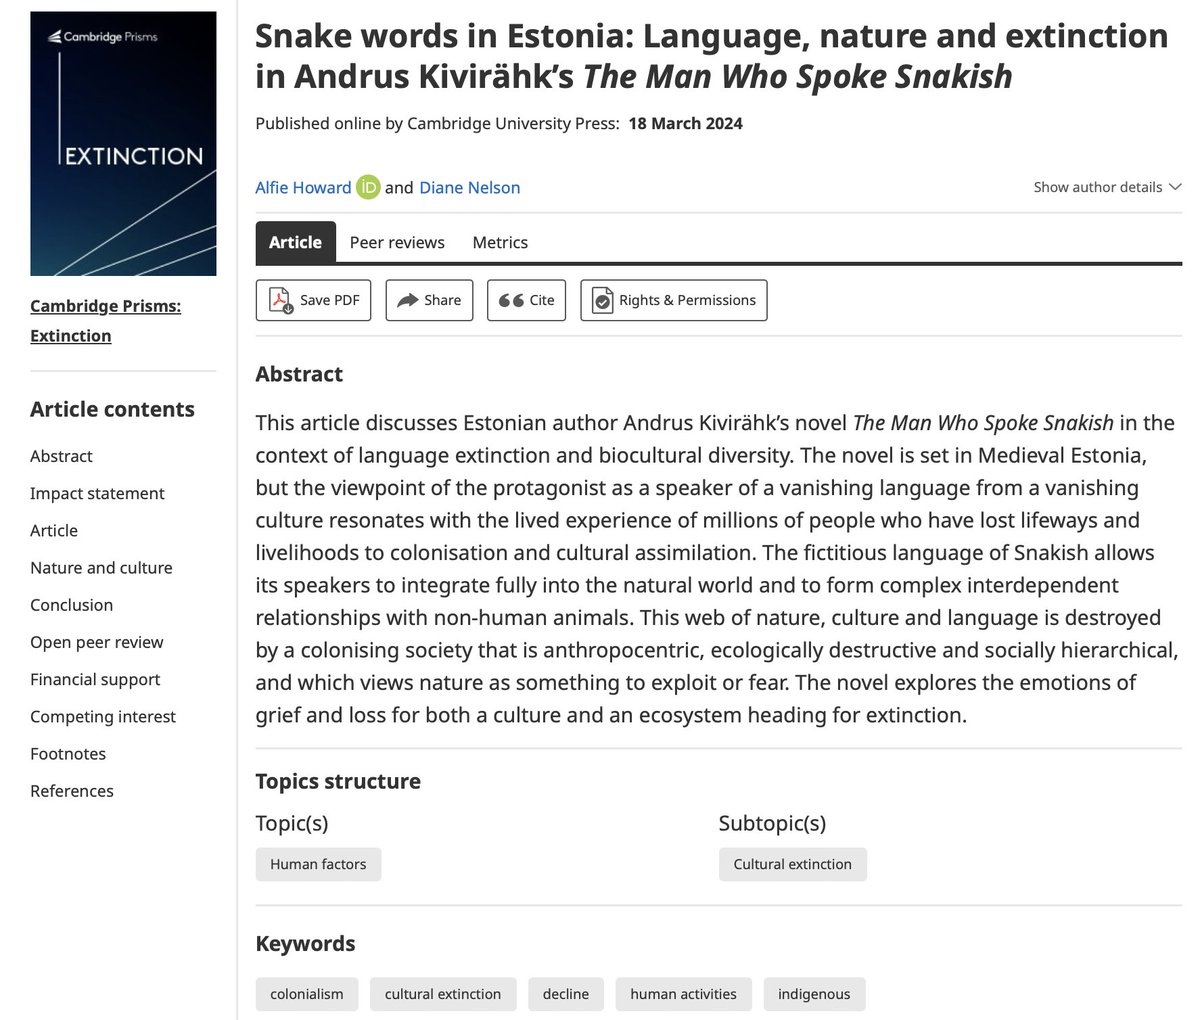 Recently published in #CPExtinction: Snake words in Estonia: Language, nature & extinction in Andrus Kivirähk’s The Man Who Spoke Snakish by @alfie_howard66a & @gplady. Find out more about language #extinction & #biocultural diversity here: bit.ly/4atxTS2